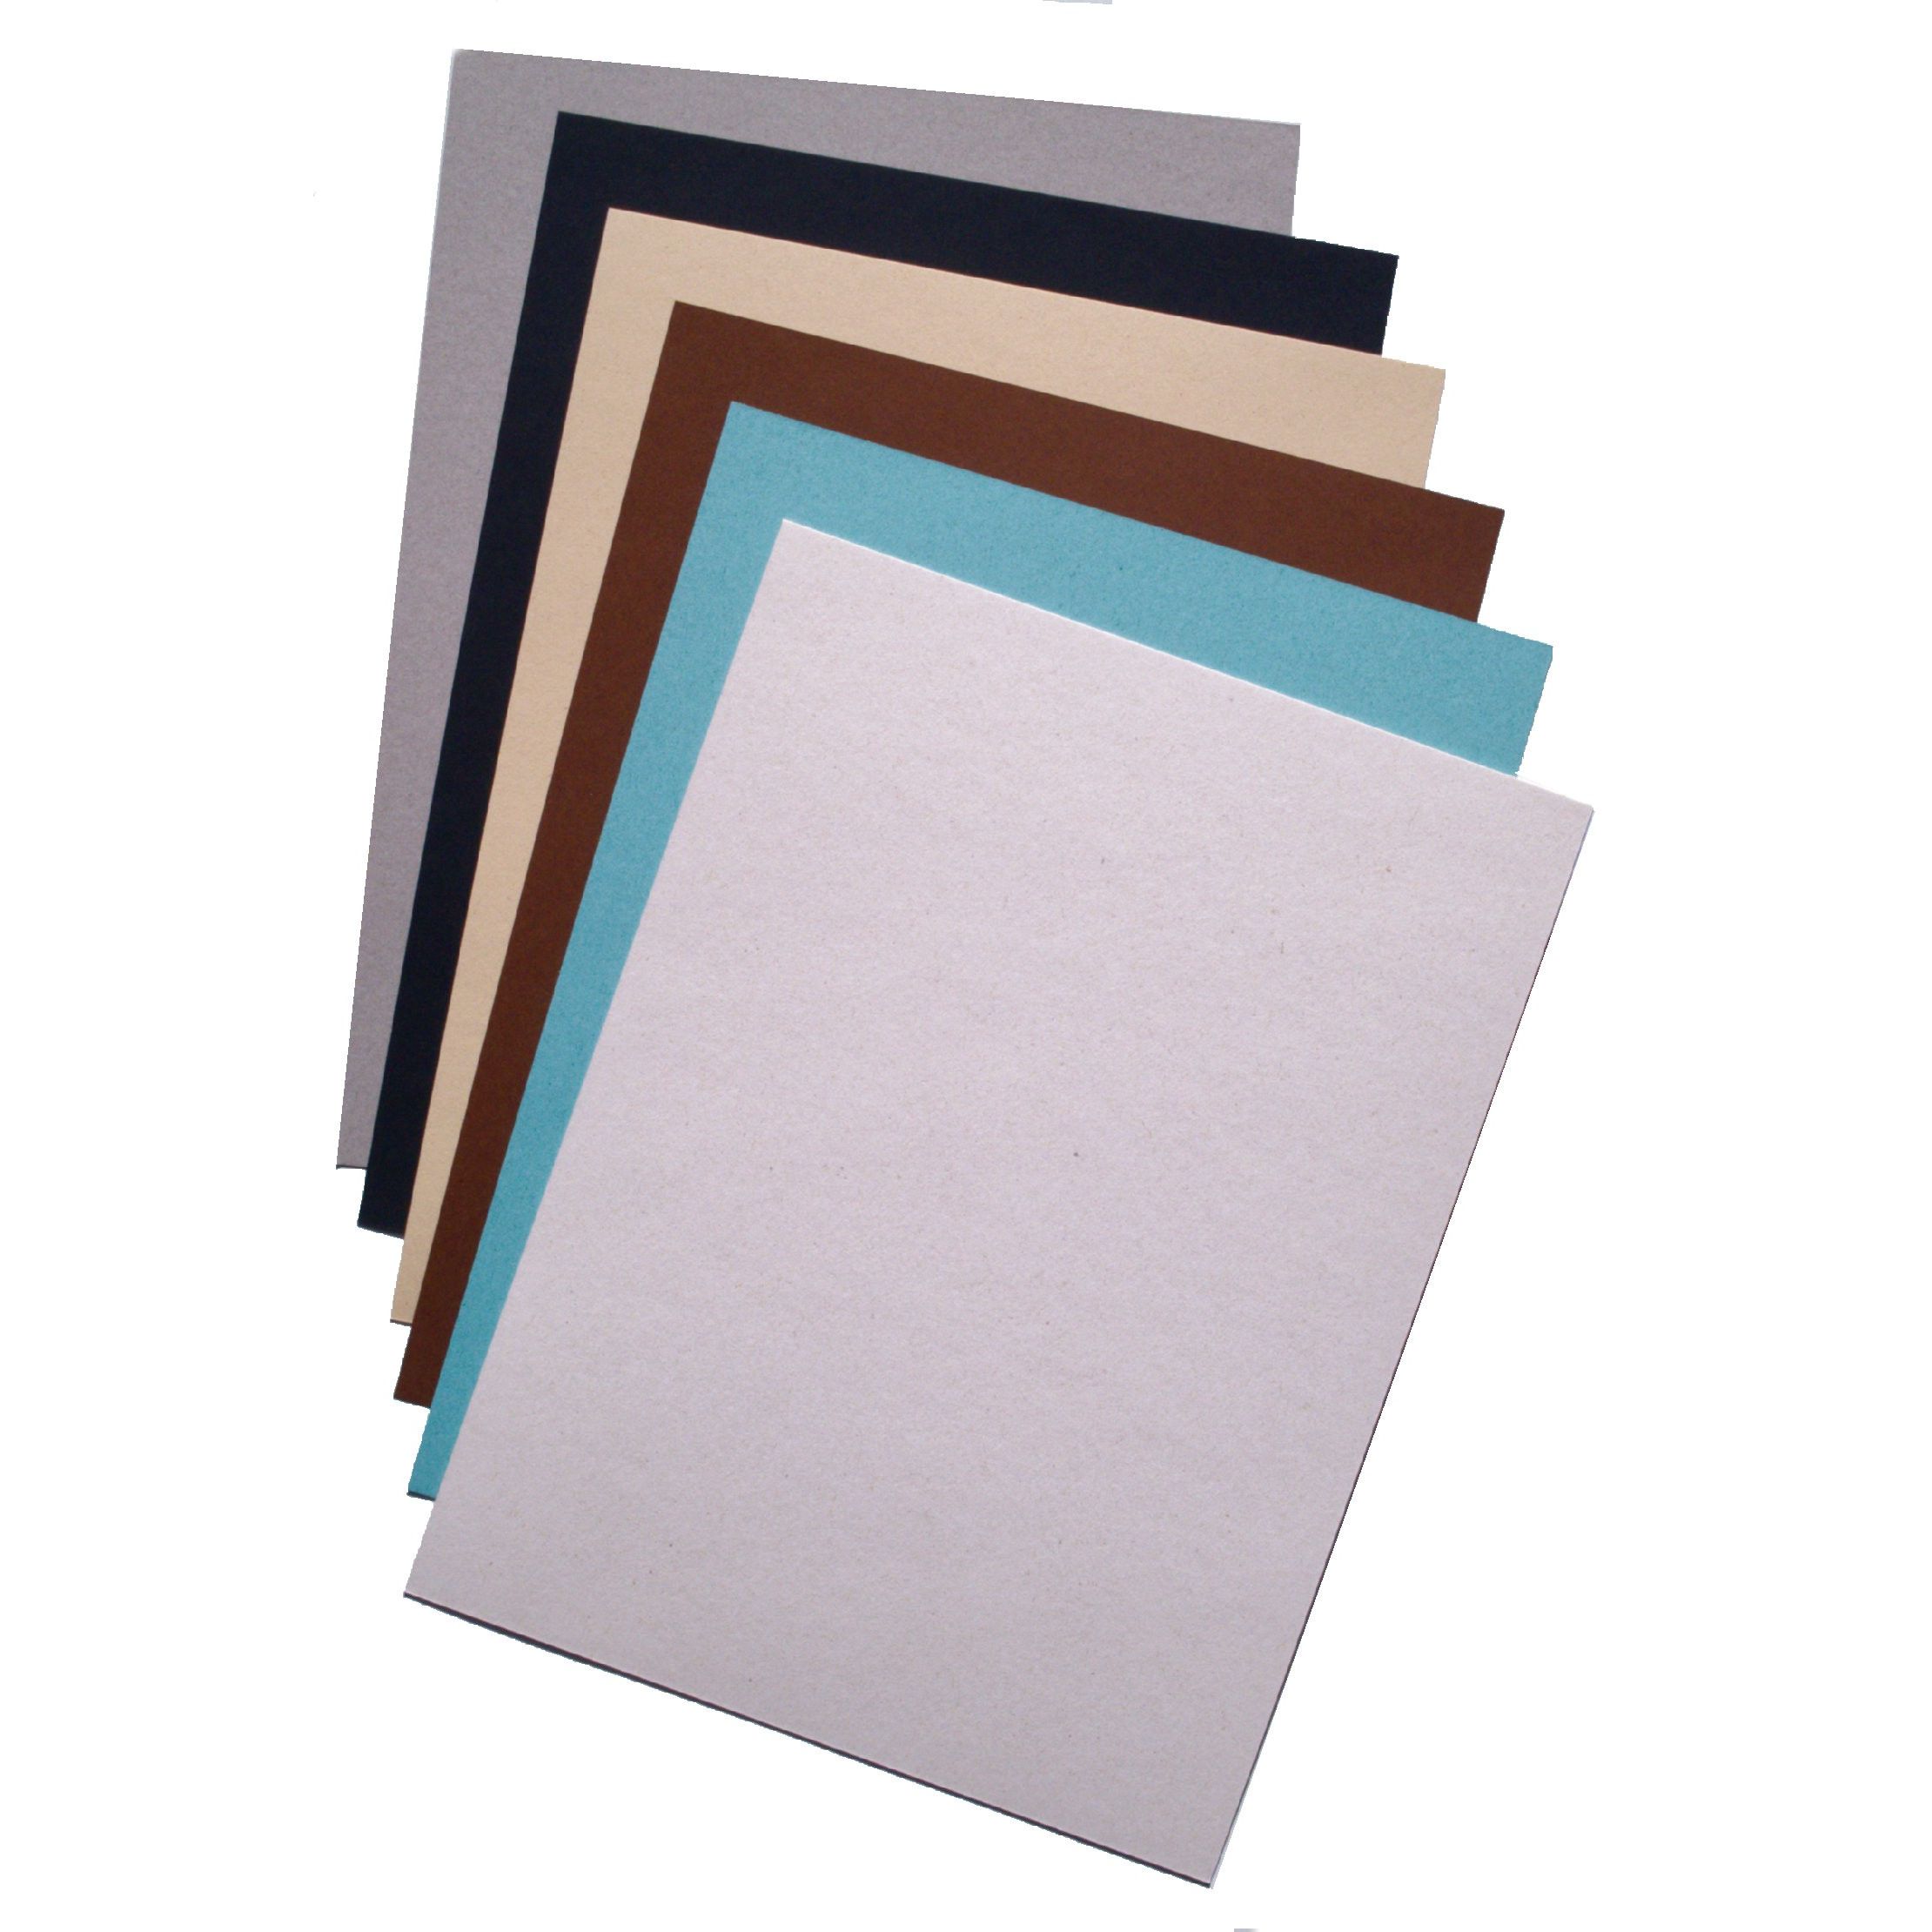 REMAKE Brown Autumn - 8.5X14 Card Stock Paper - 92lb Cover (250gsm) - 100 P